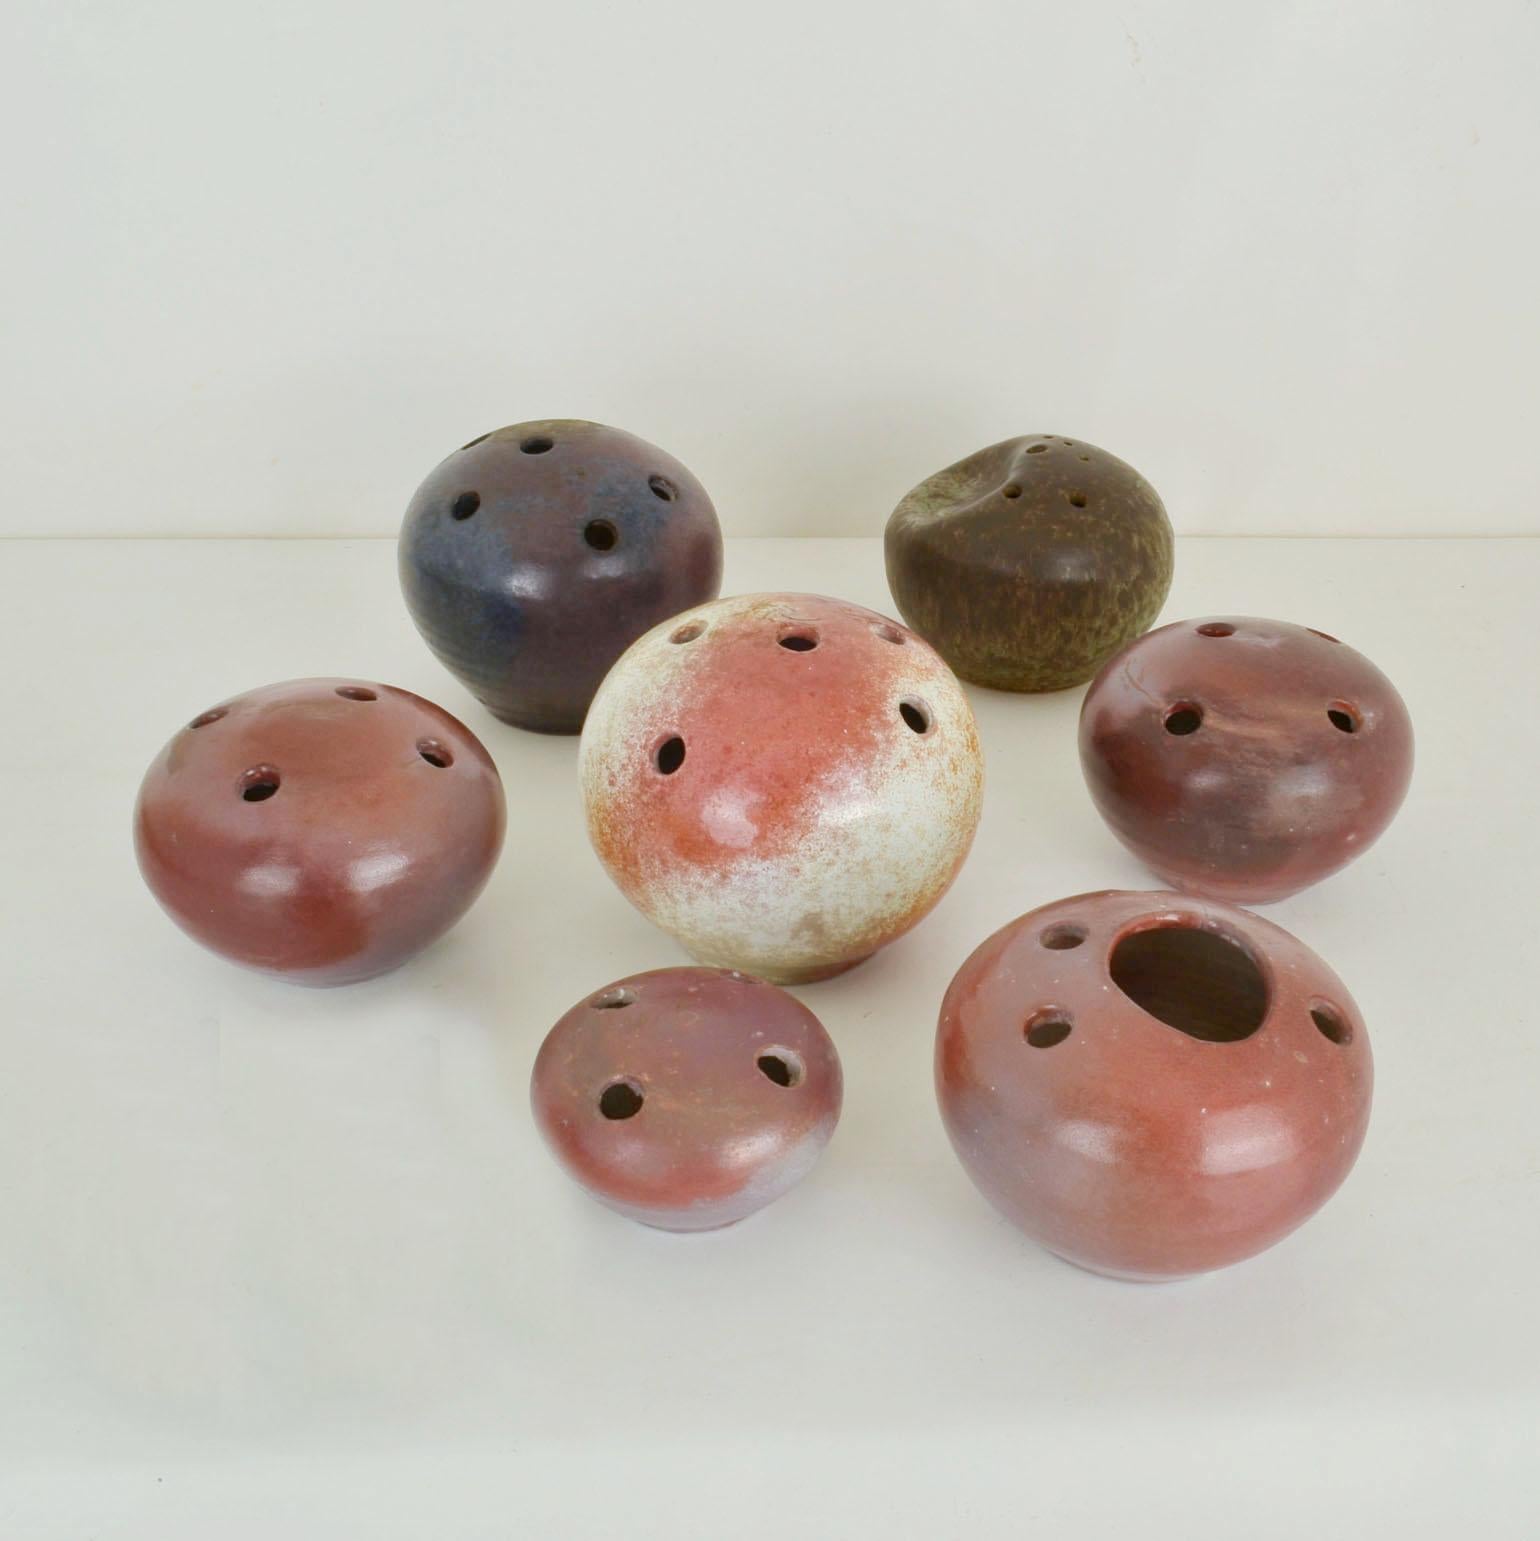 A group of seven organic ball shaped Studio Pottery vases in natural colours, were produced in the 1960s. The individual appearance is unique in their shape, glaze and texture resembling the pebbles we find in nature. This one off collection was